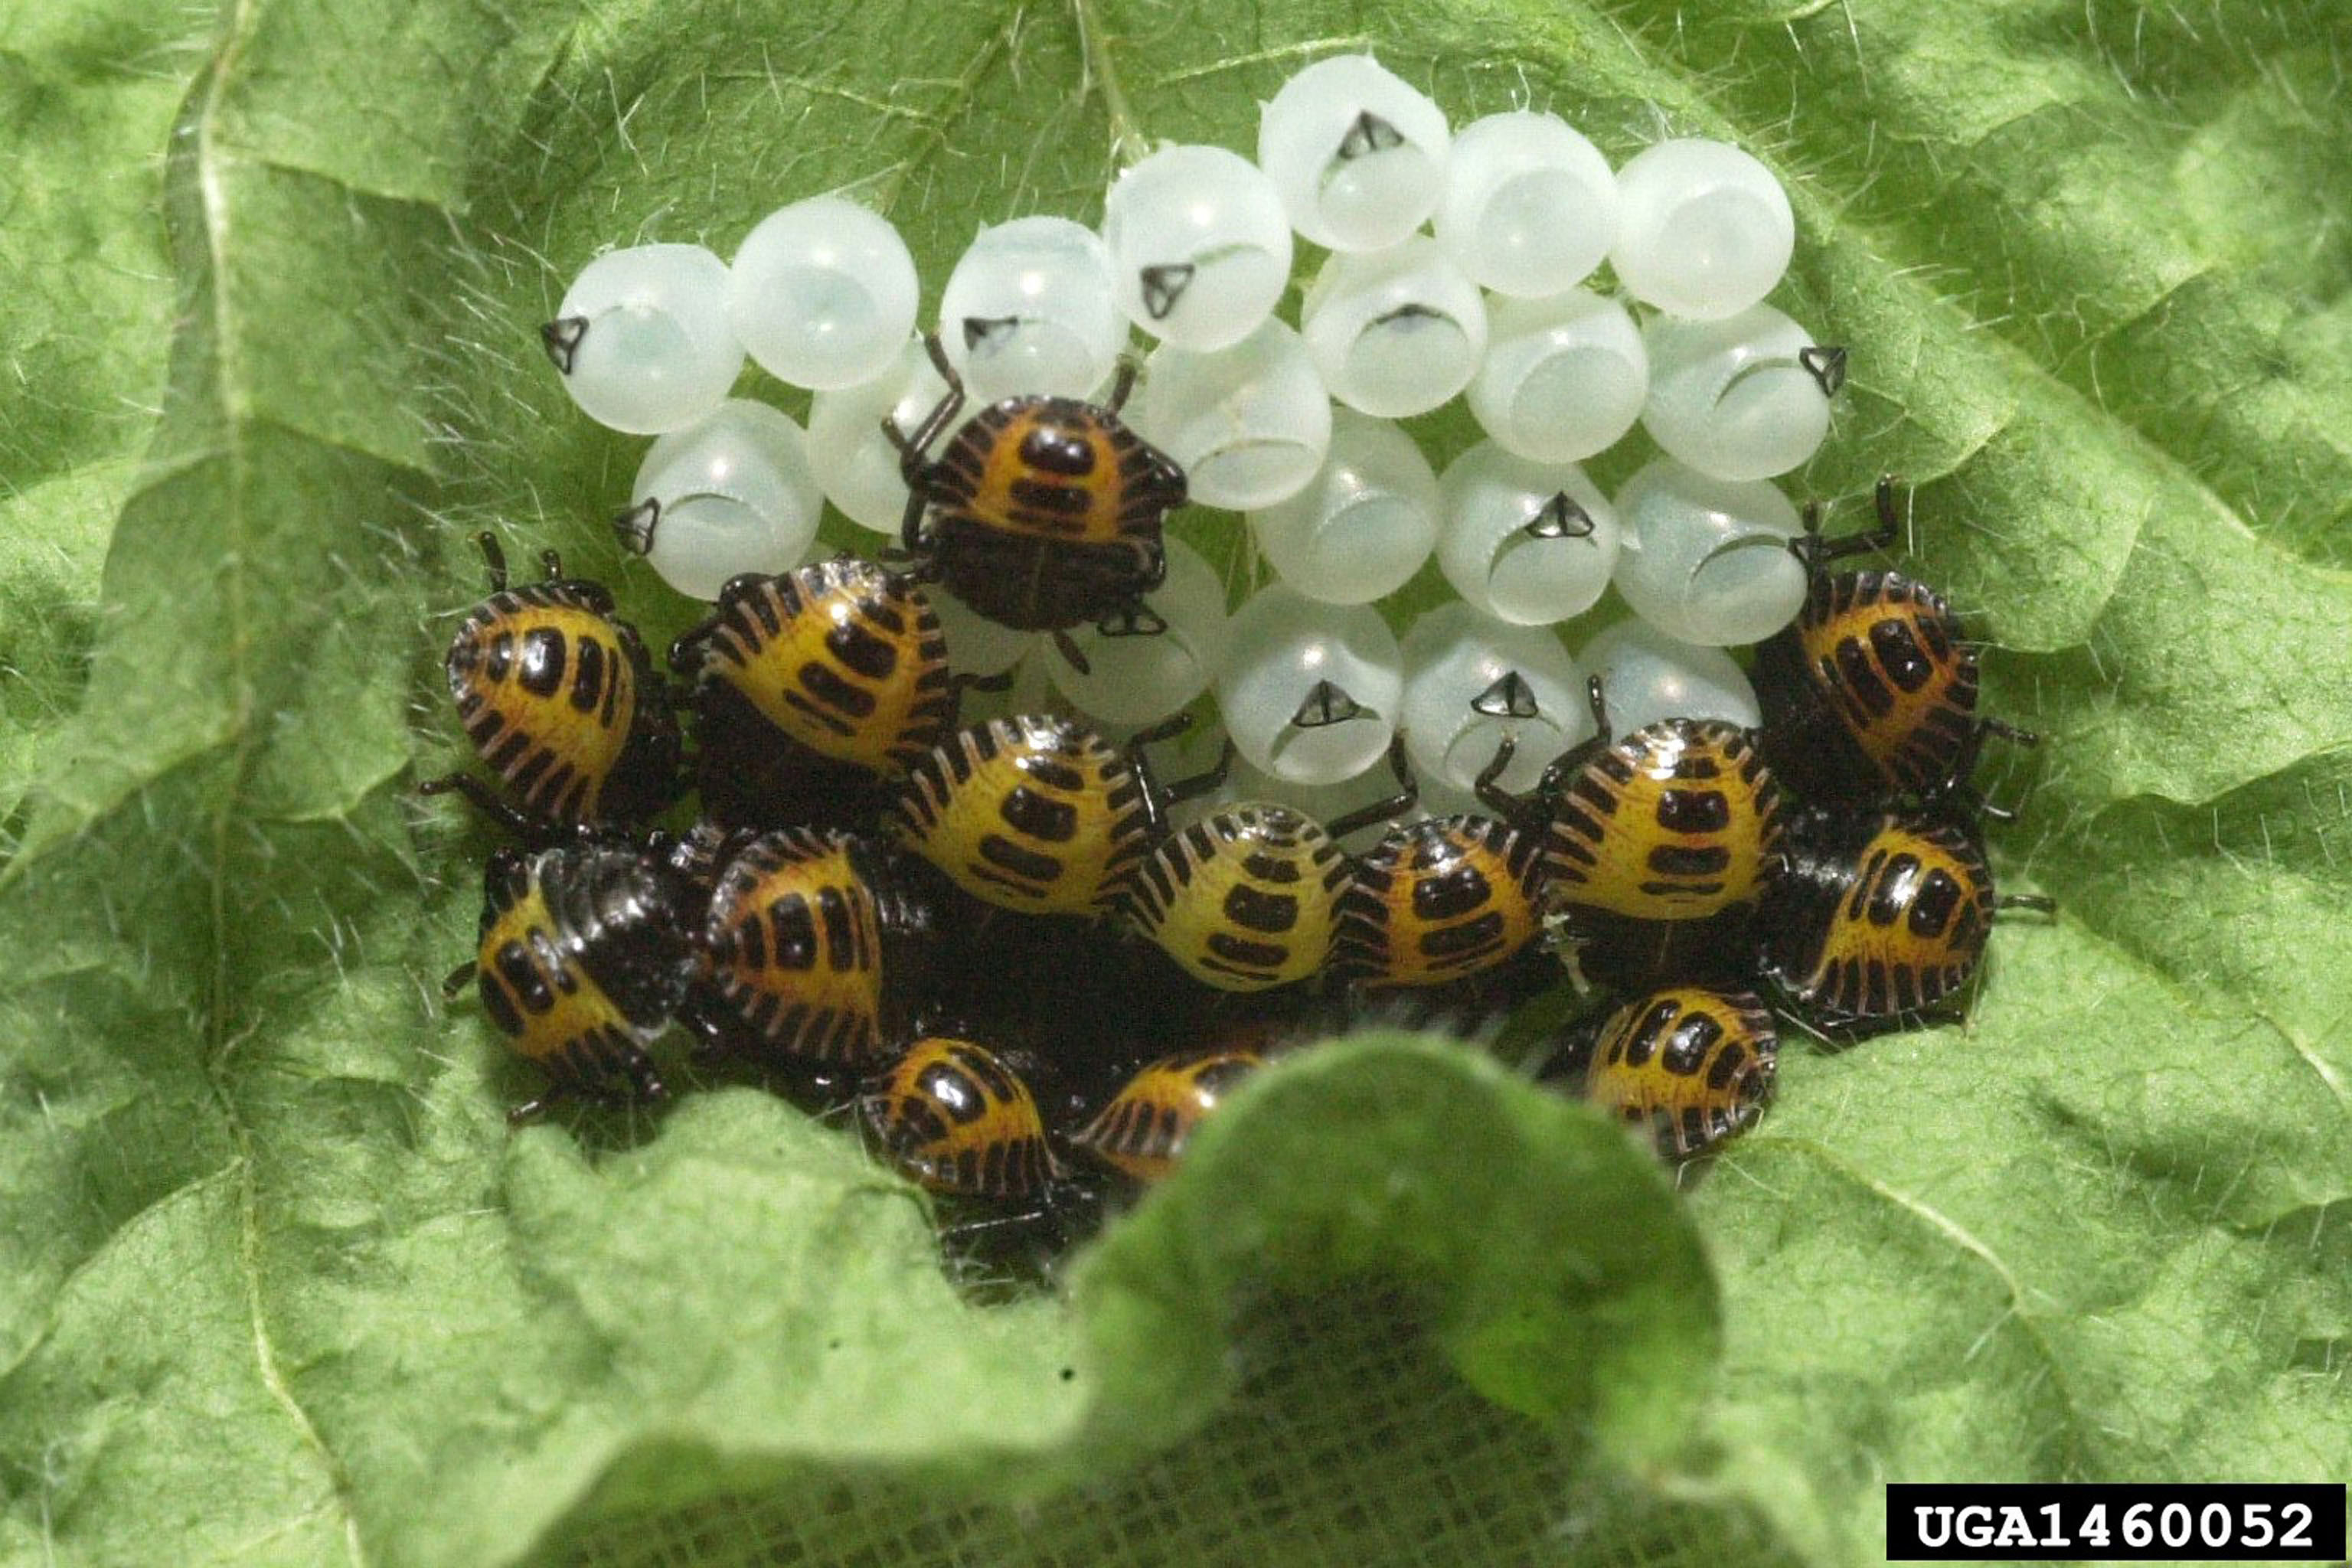 White spherical eggs and some newly hatched yellow/orange and black shield shaped bugs on a green leaf